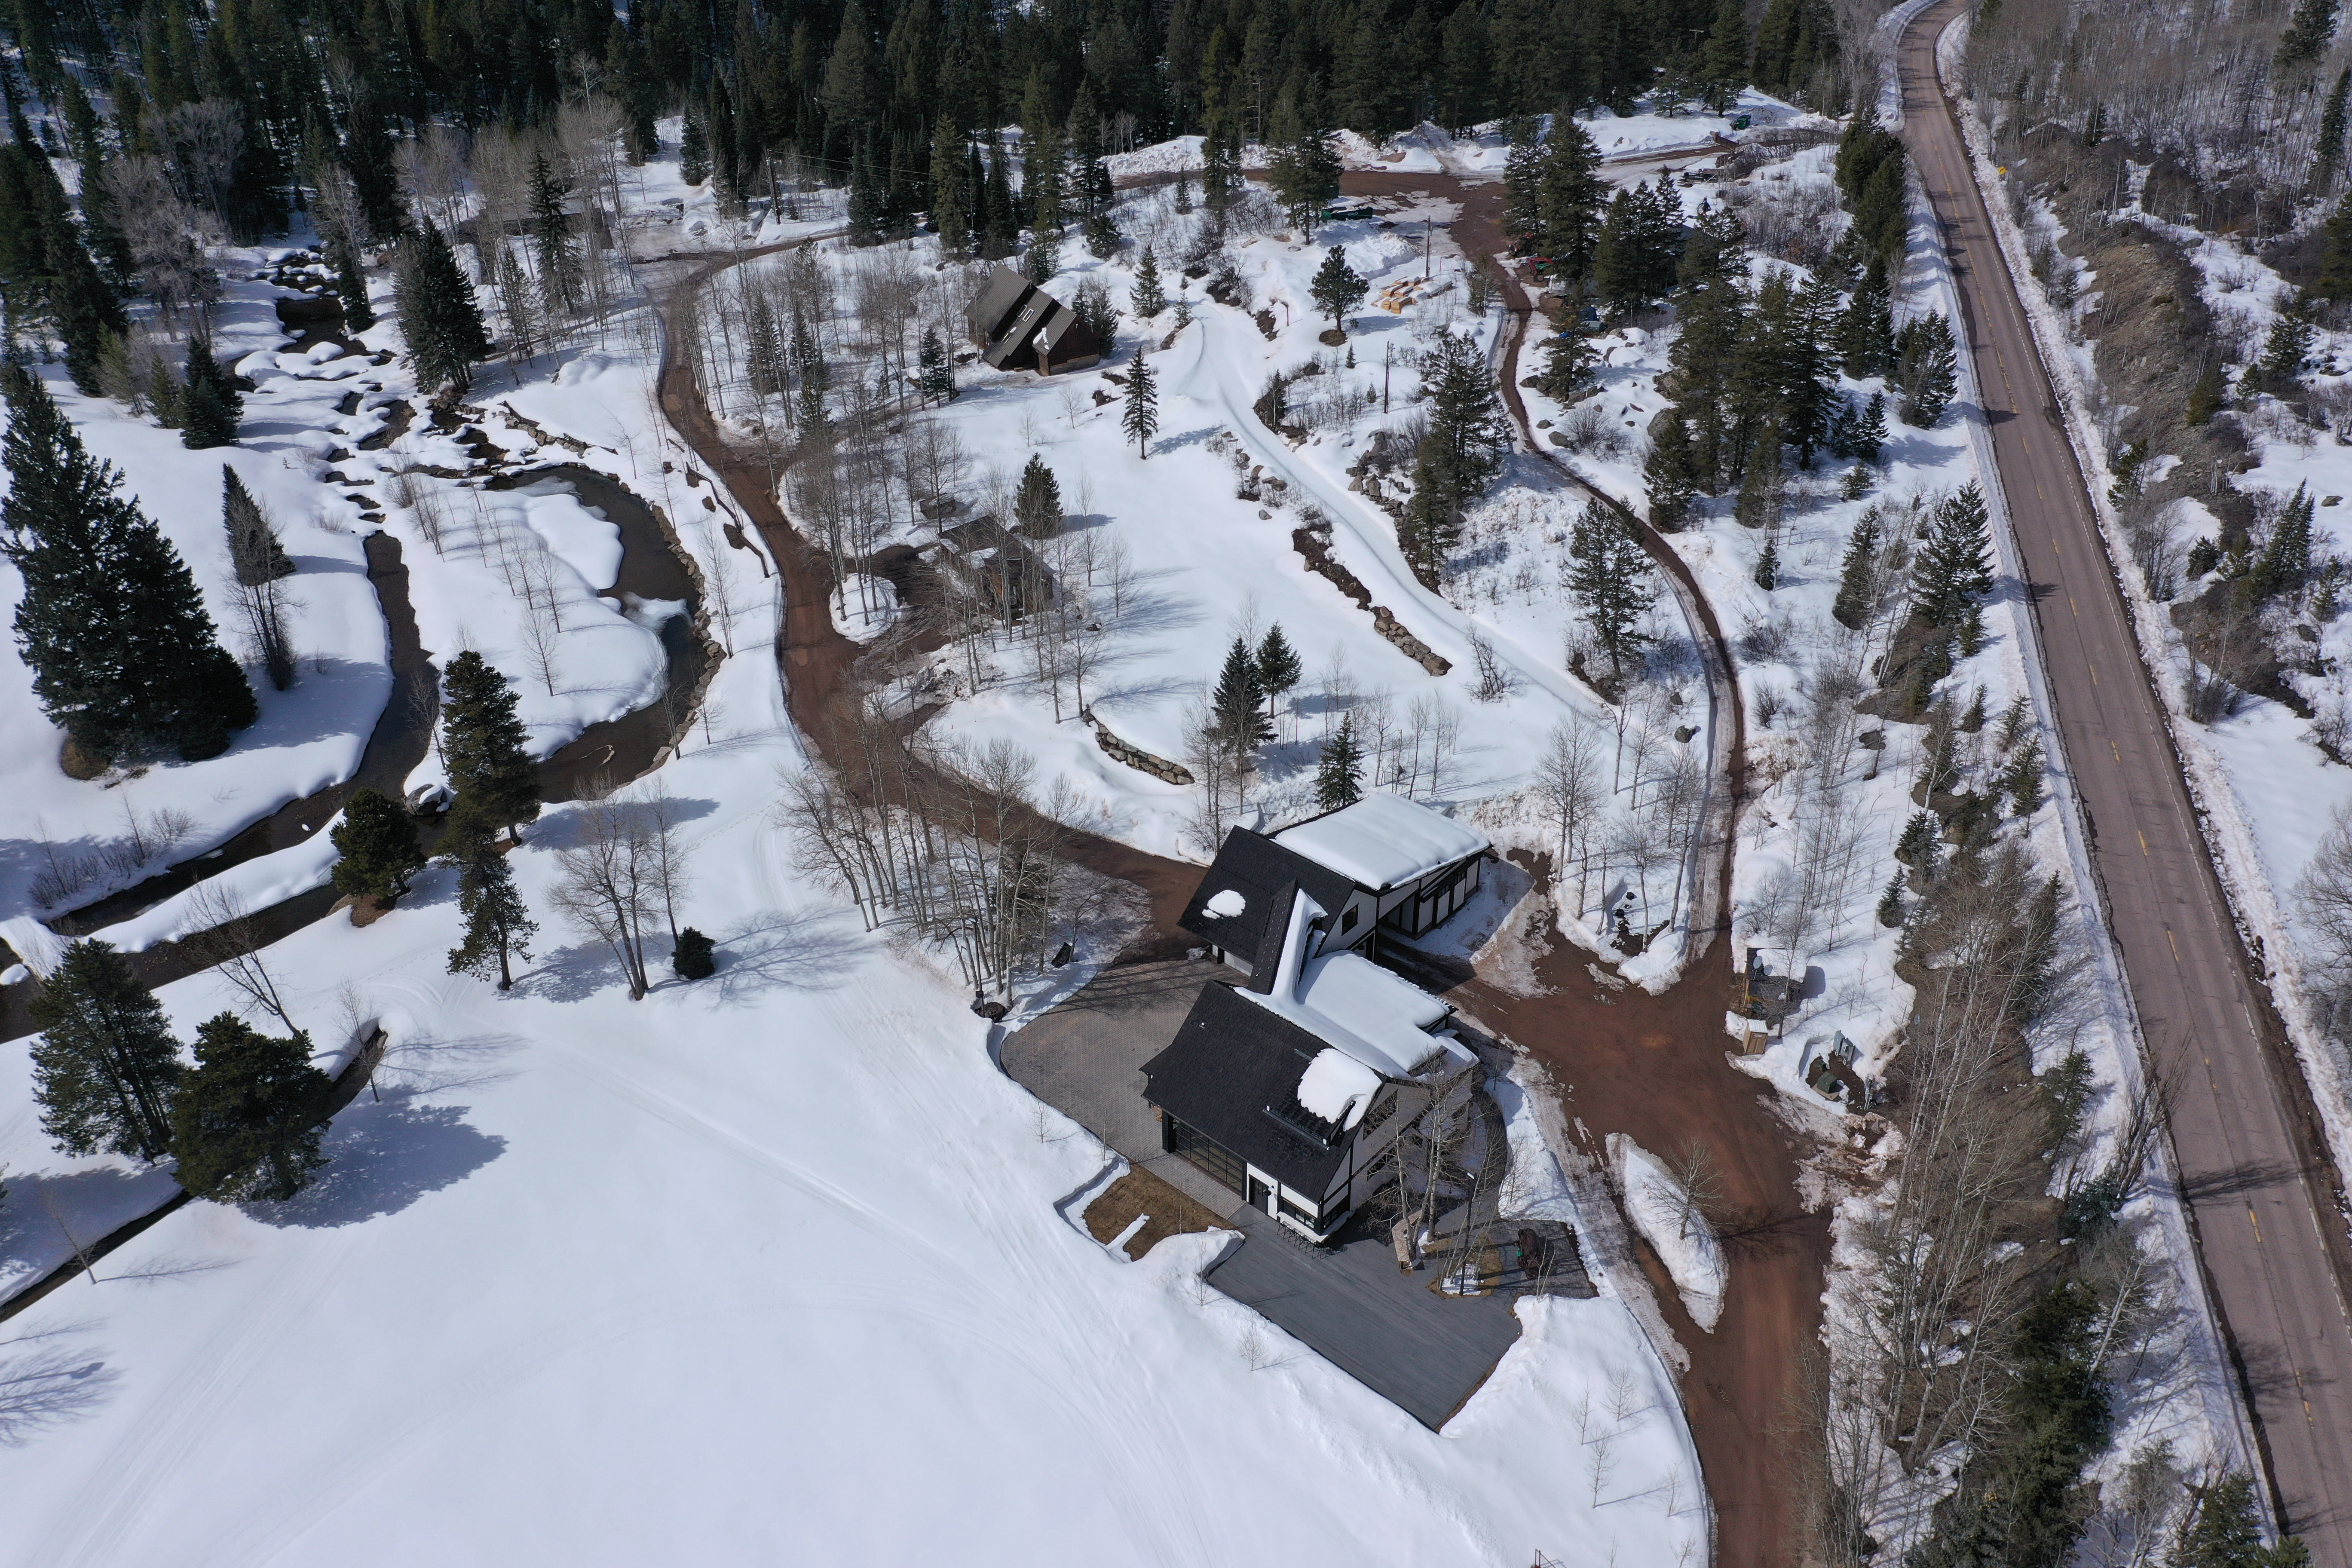 Costner usually rents the property out during the winter months while Aspen's ski season is in full swing